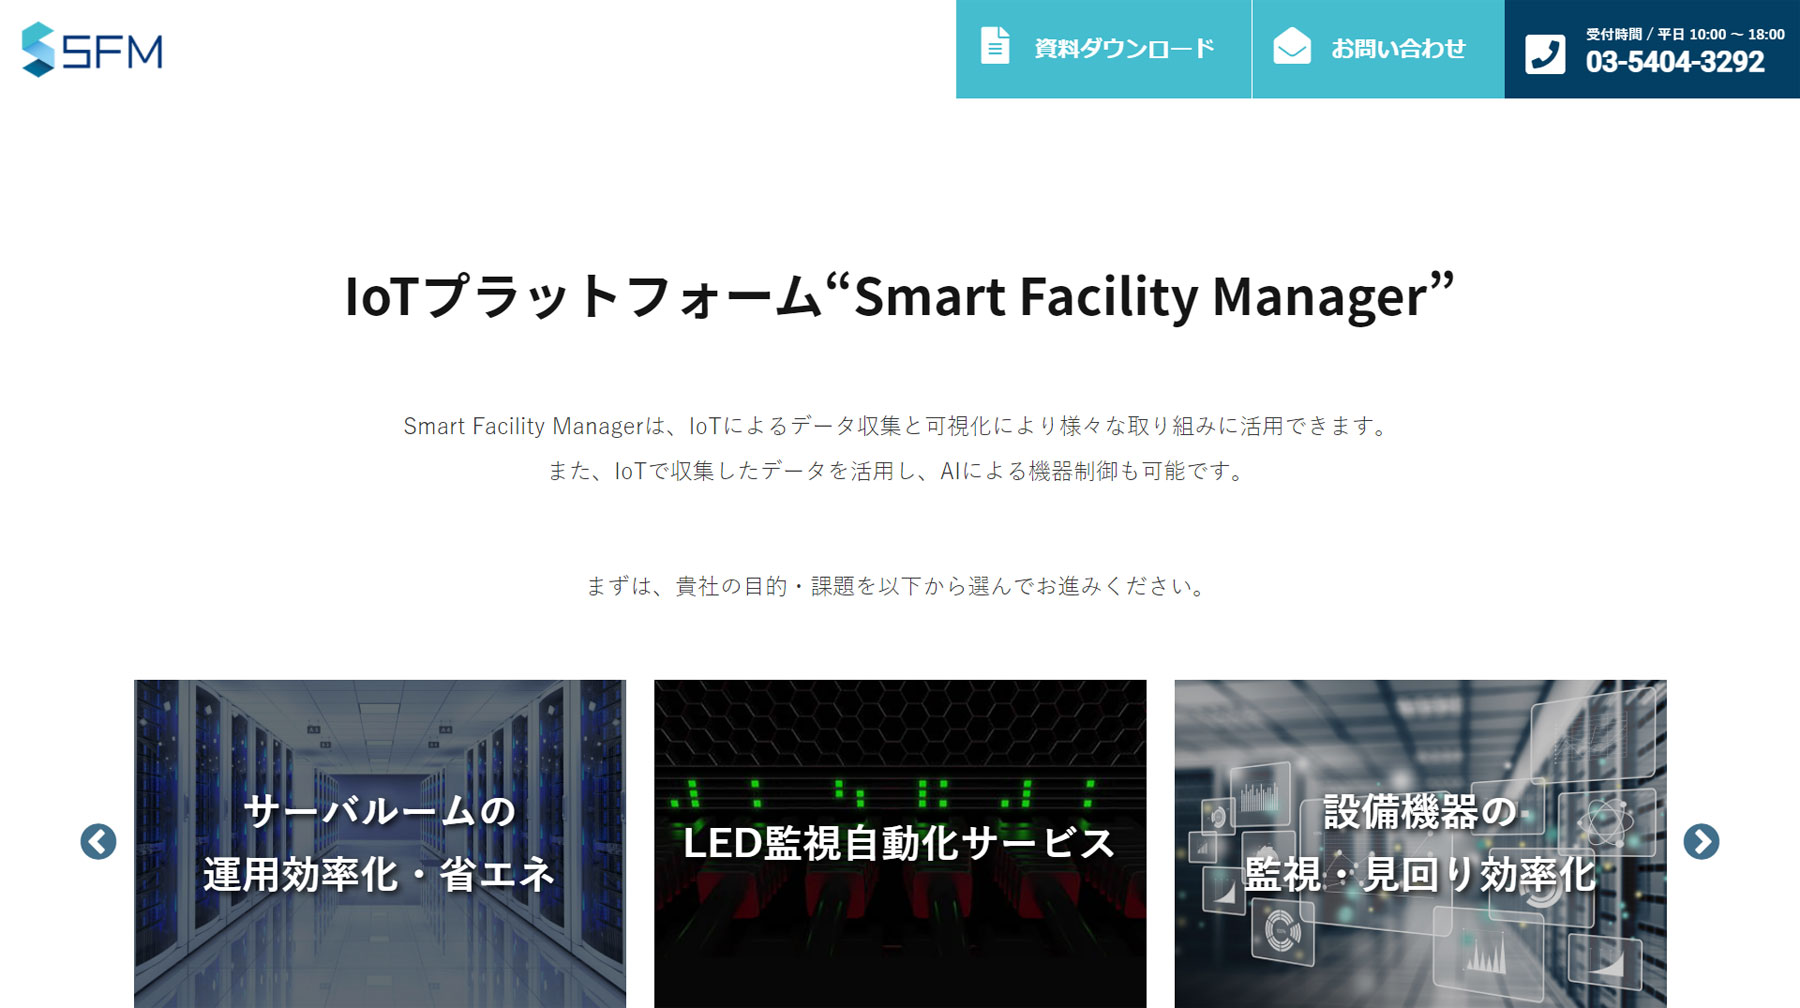 Smart Facility Manager